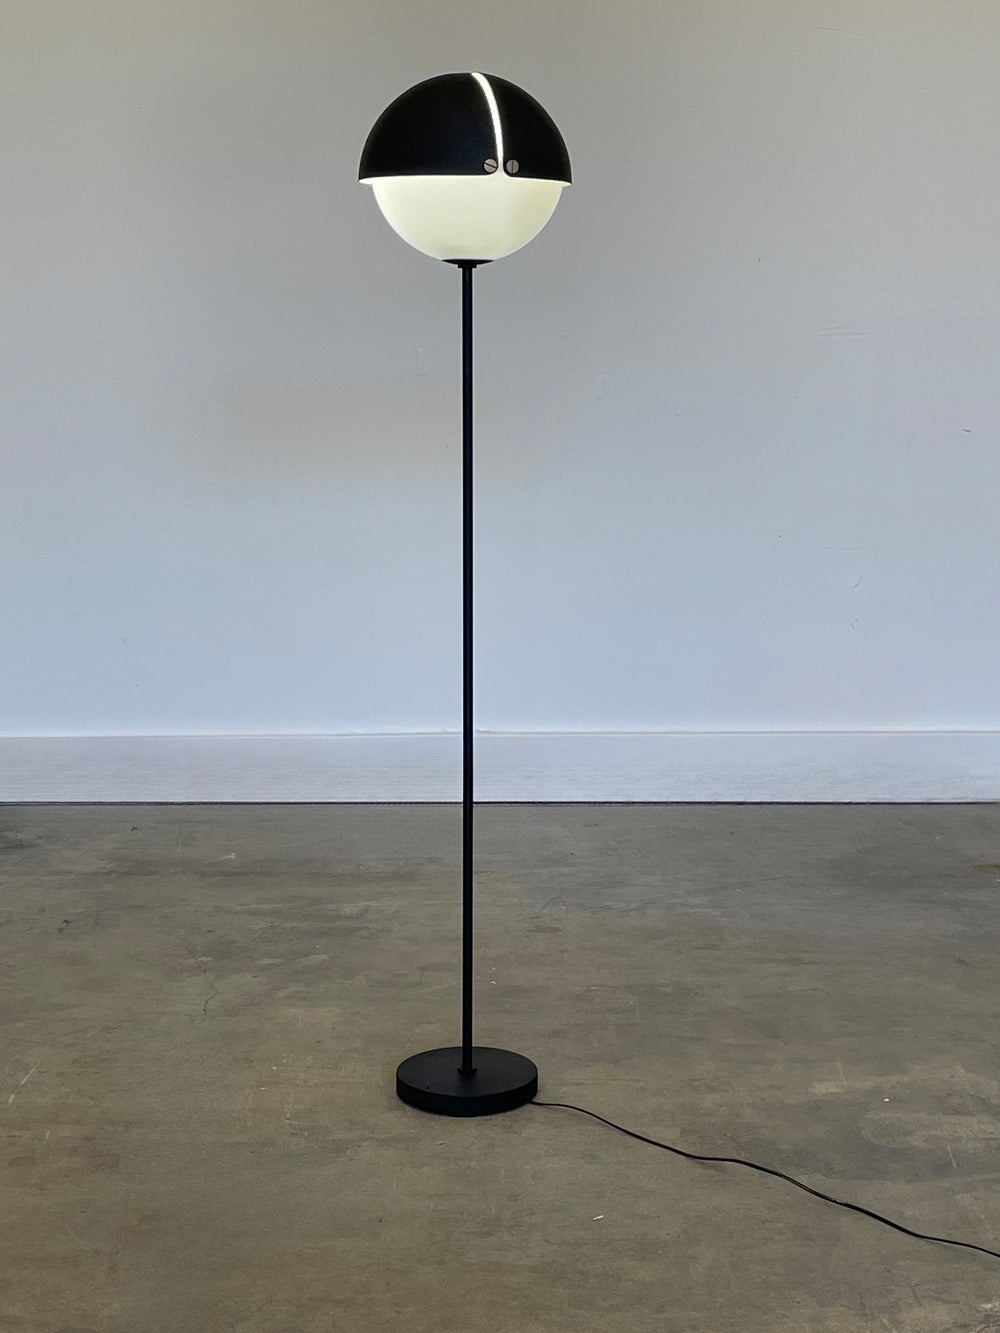 Attributed to Stinovo black and chrome orb floor lamp